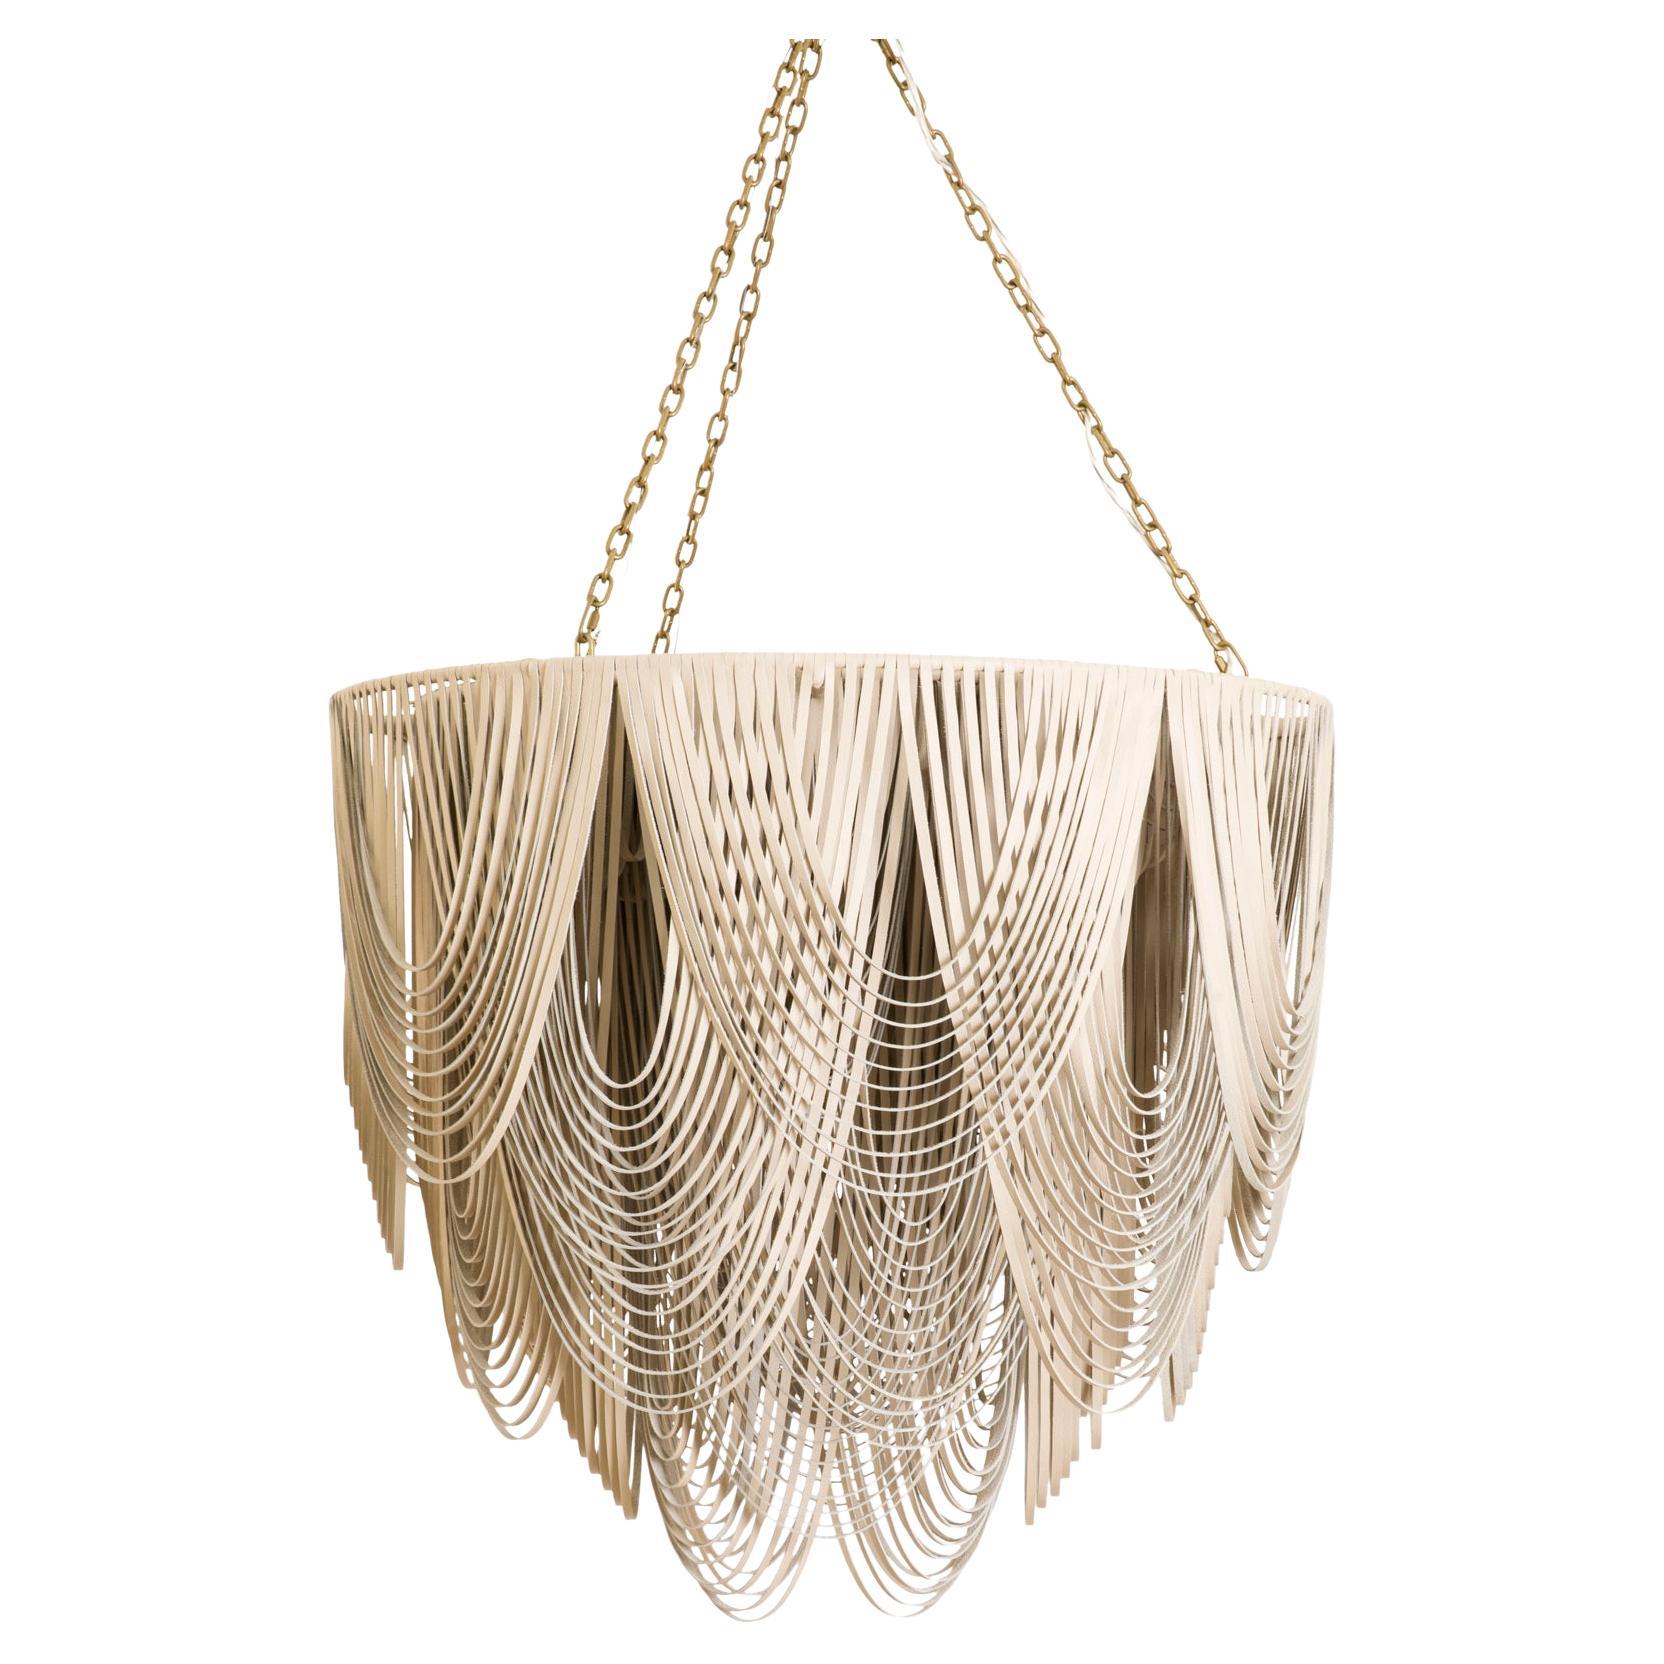 Chandelier - Leather - Whisper Large Flat Top in Cream-Stone 